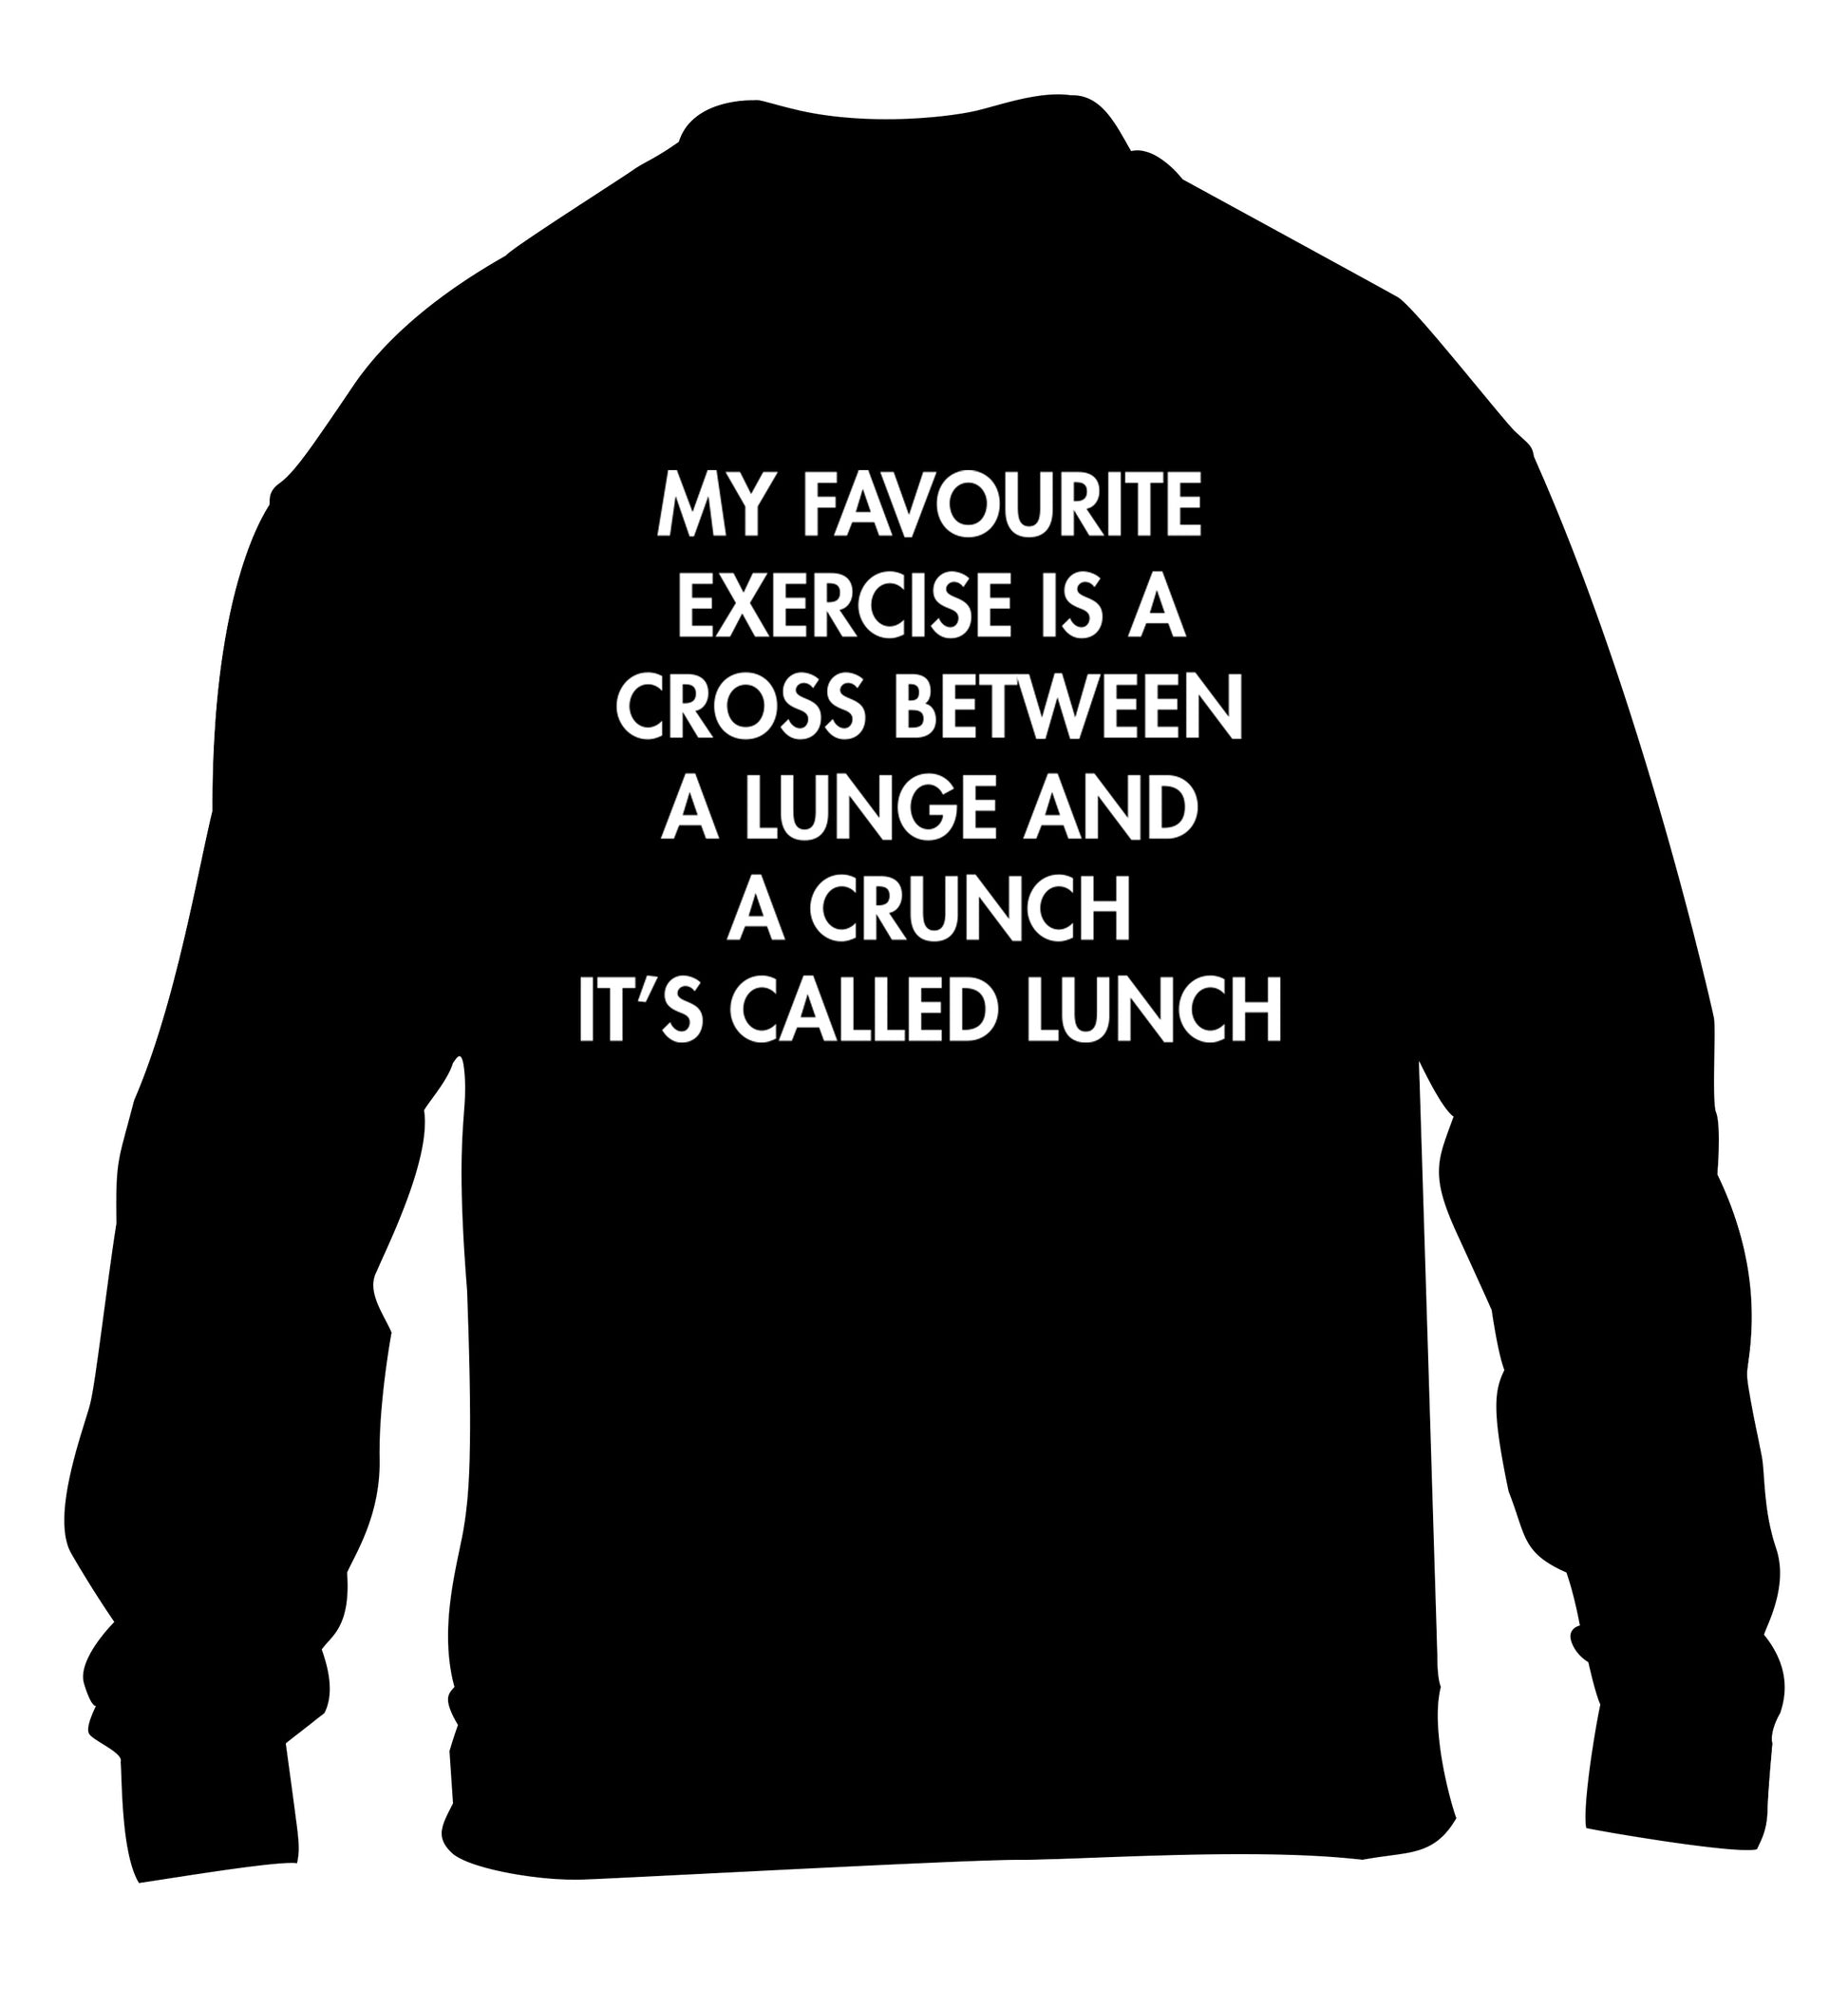 My favourite exercise is a cross between a lung and a crunch it's called lunch children's black sweater 12-14 Years